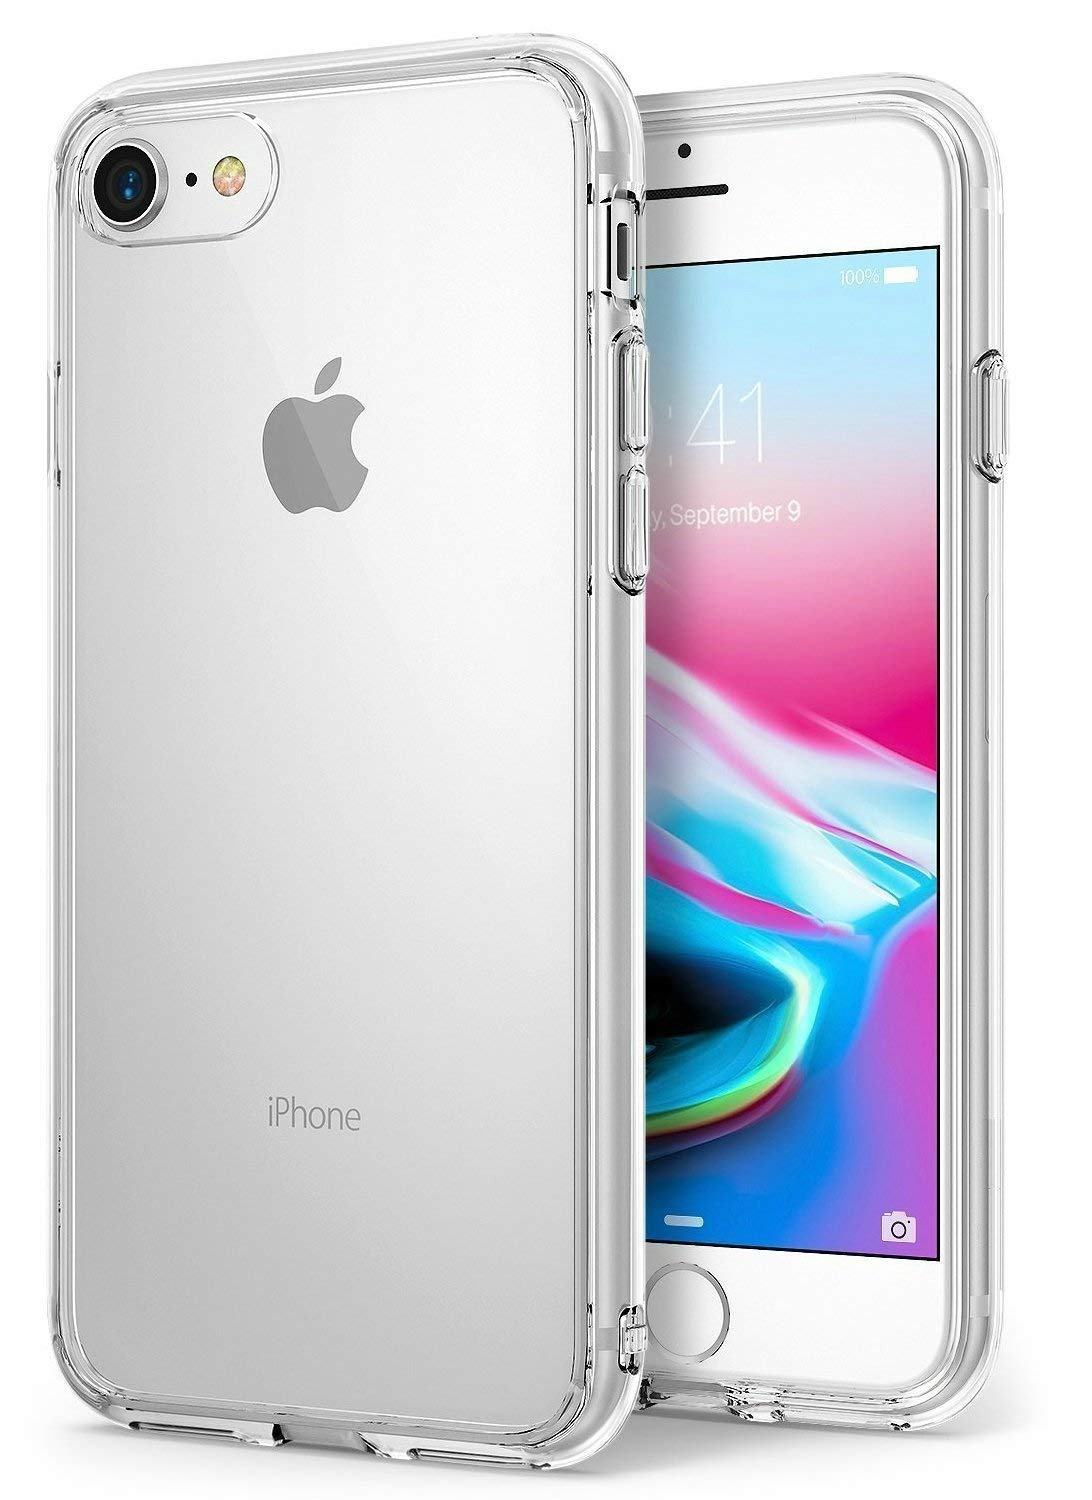 Clear Hybrid Transparent Back Cover/Cases for All iPhone Models